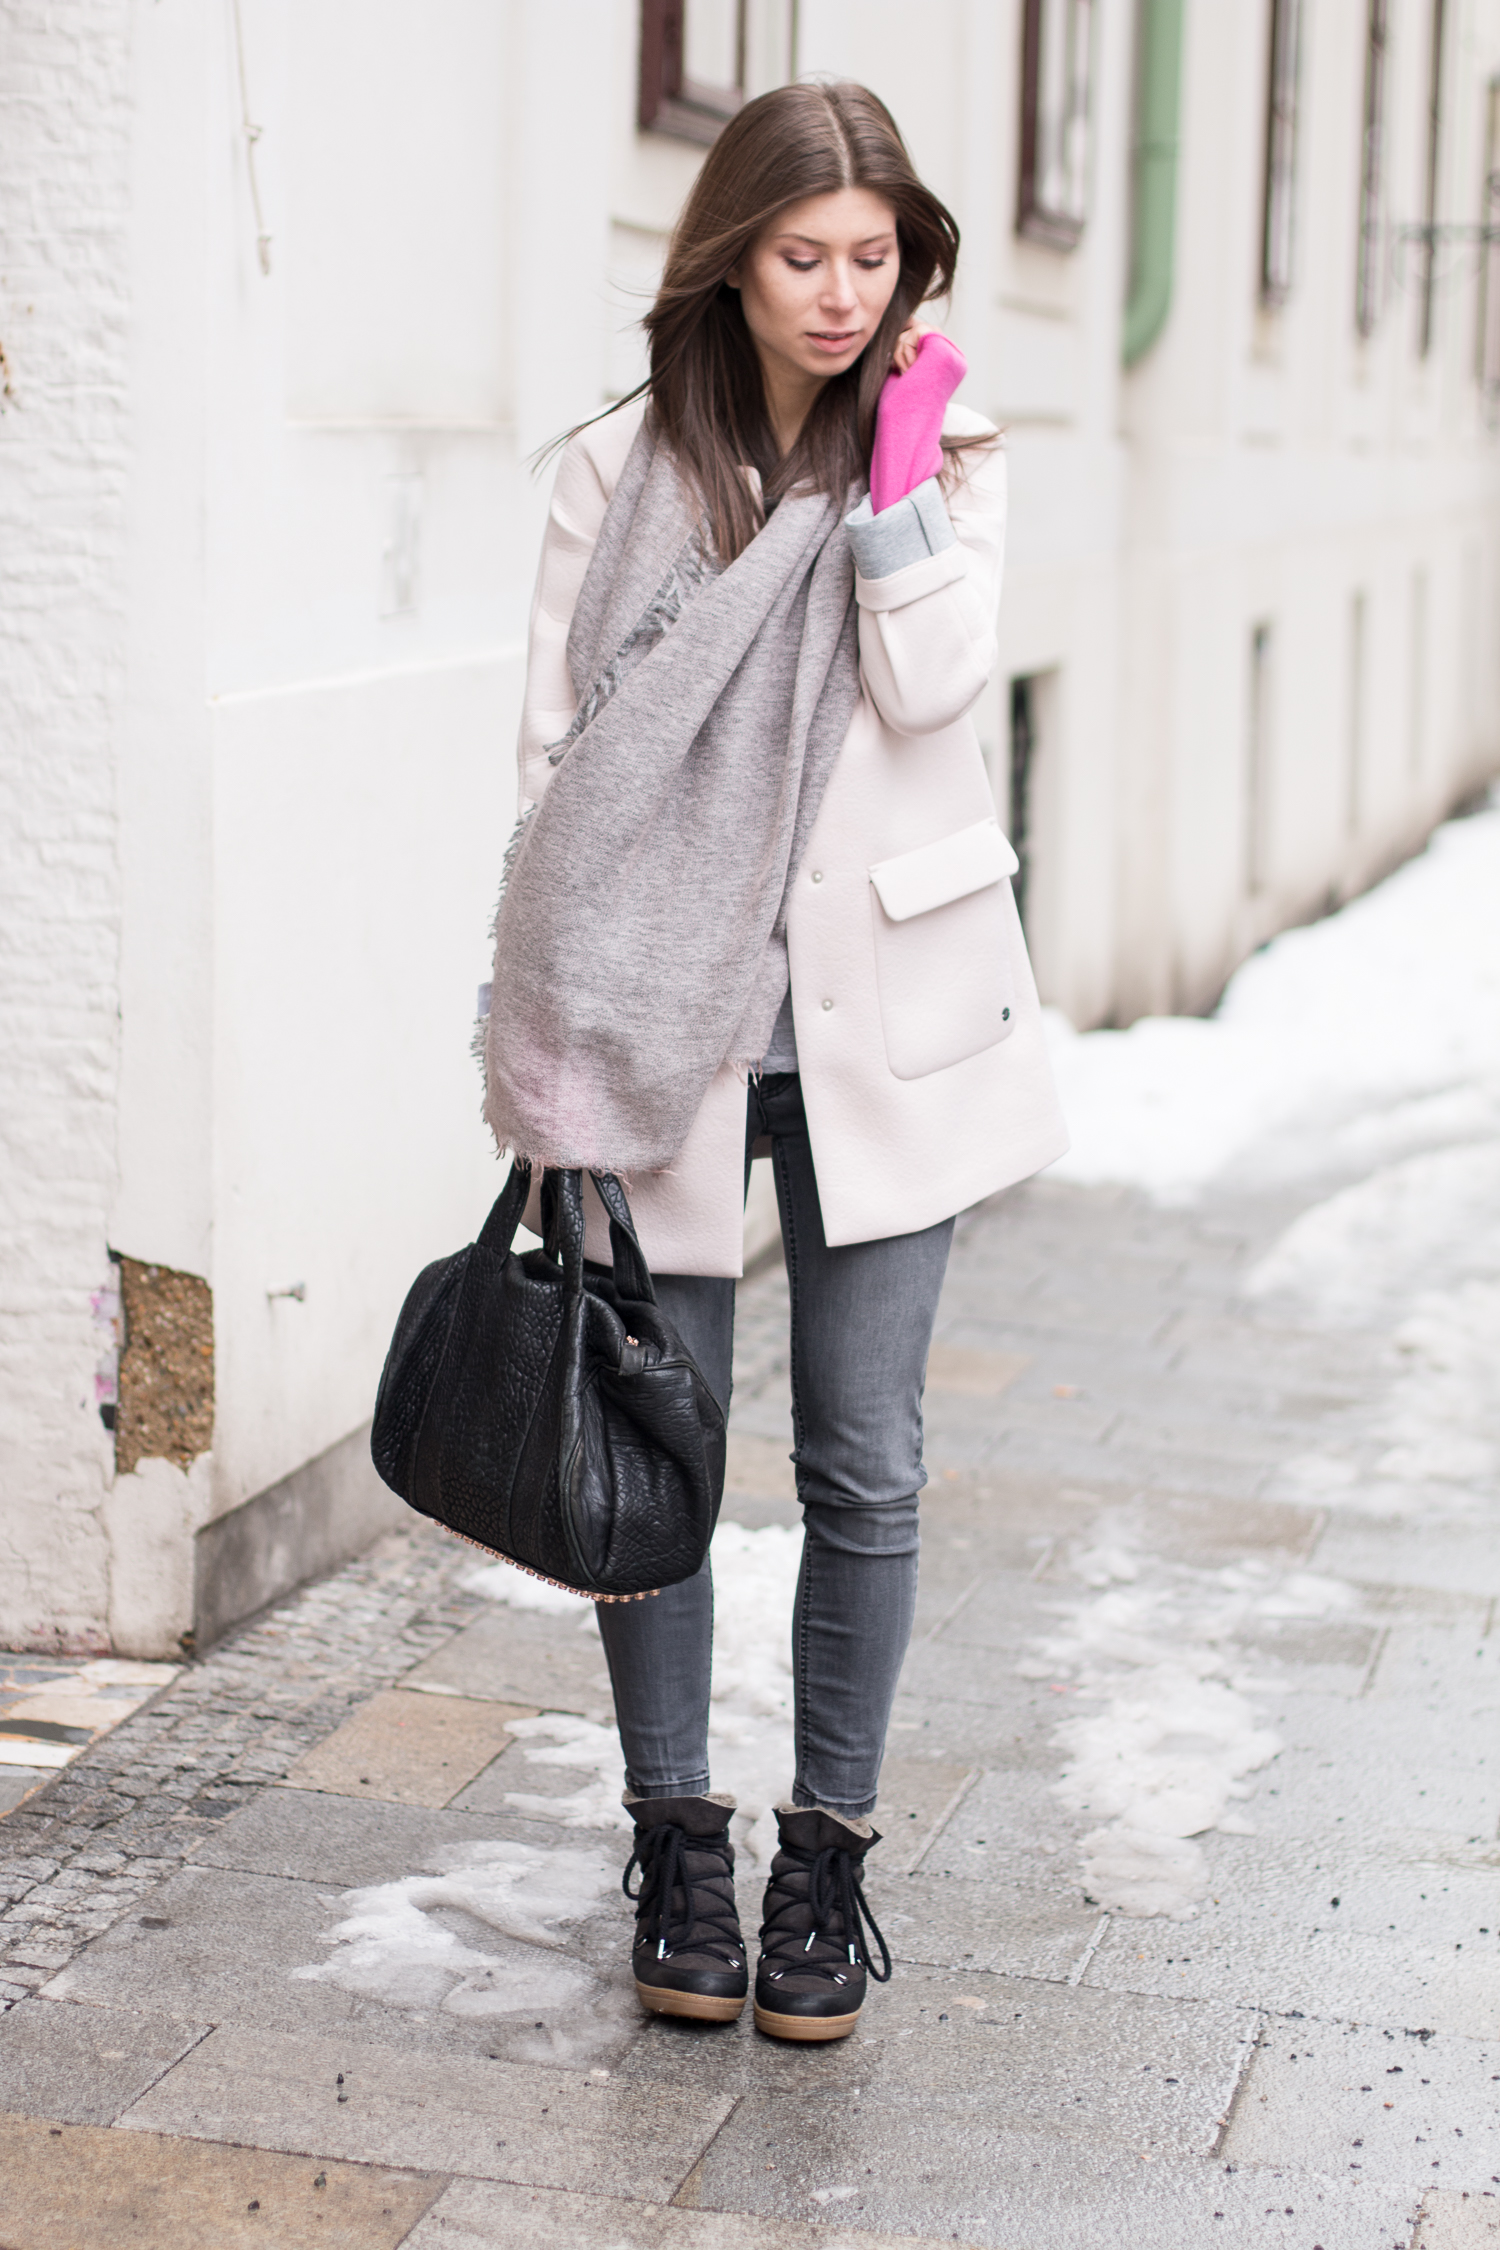 Pink & Pastels | The Daily Dose